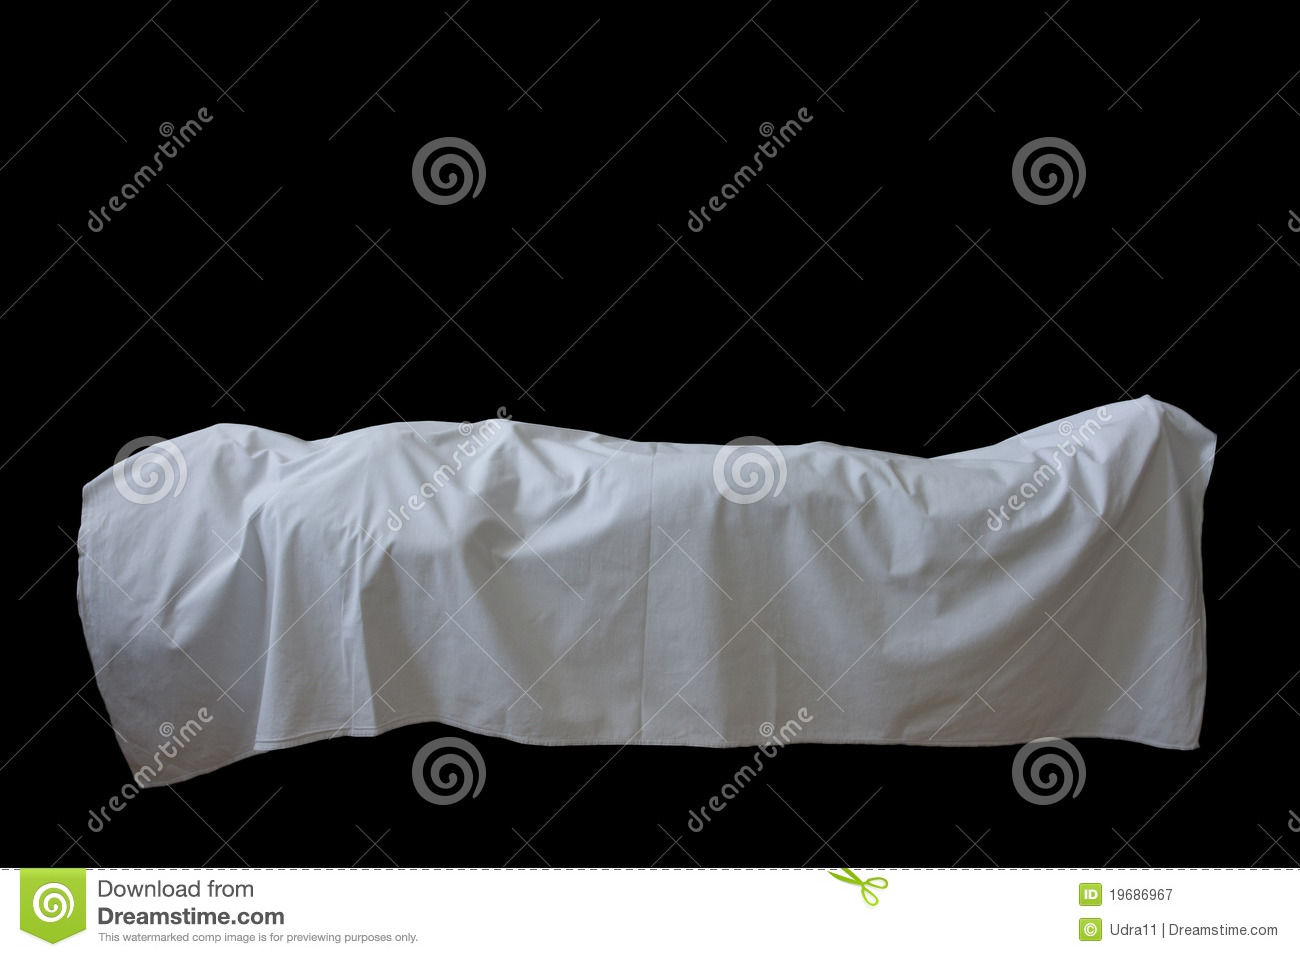 Abstract Of Dead Body Royalty Free Stock Photography   Image  19686967